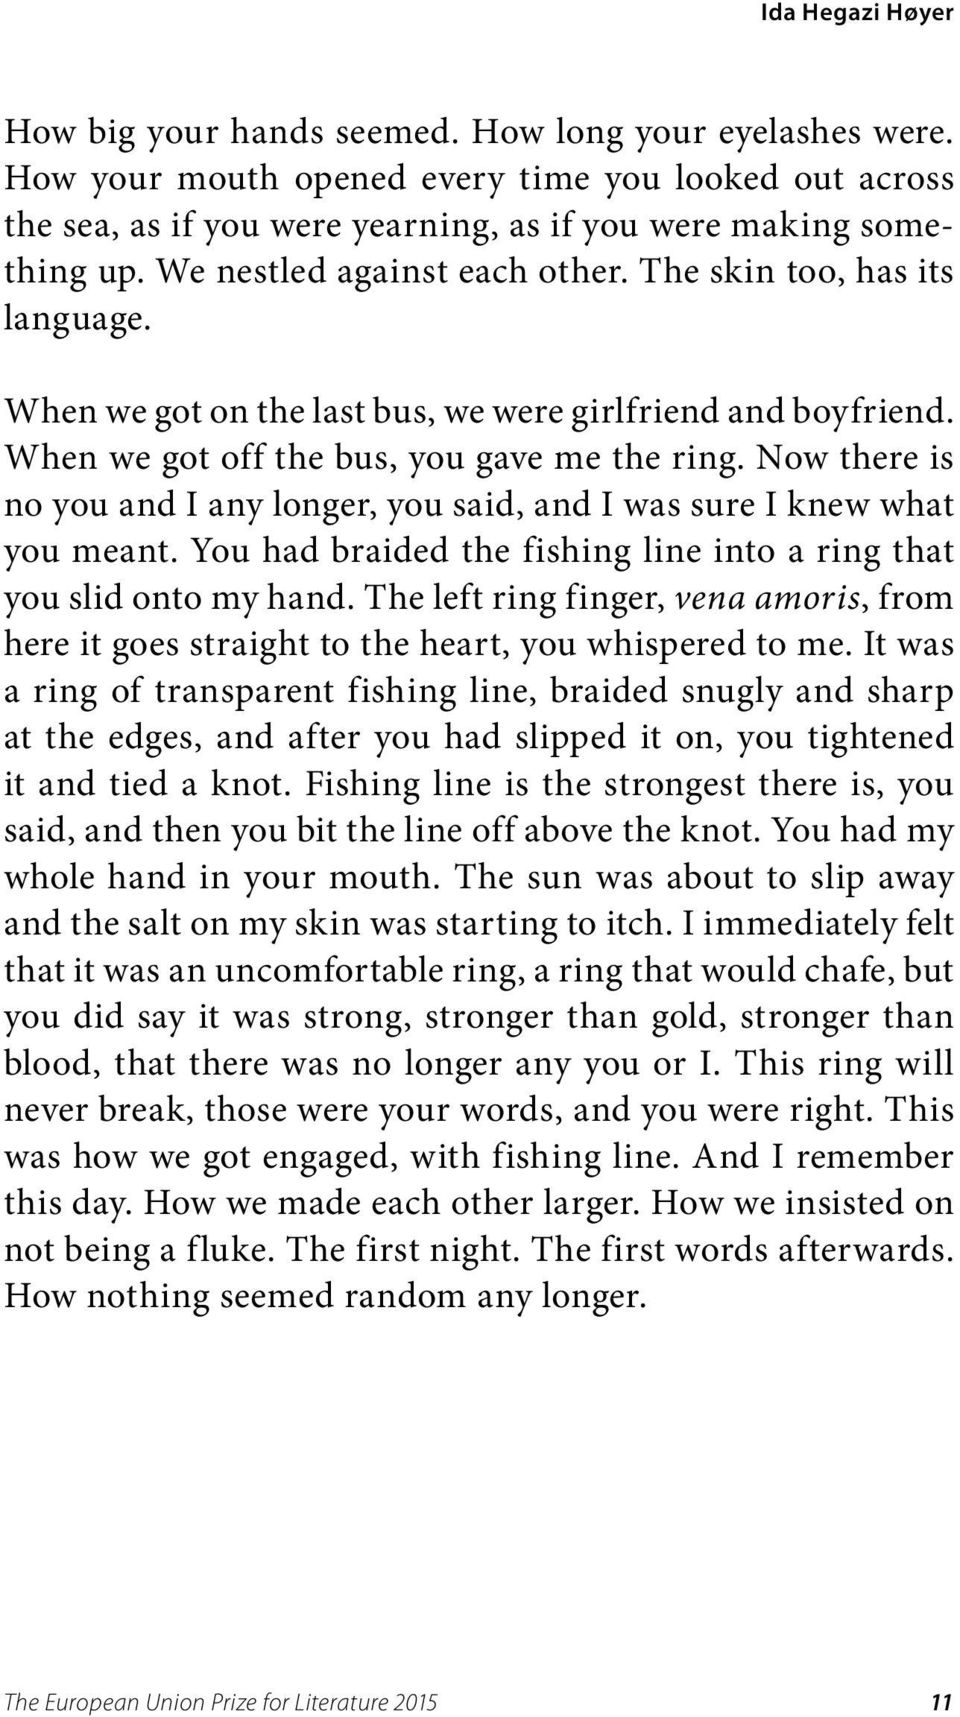 Now there is no you and I any longer, you said, and I was sure I knew what you meant. You had braided the fishing line into a ring that you slid onto my hand.